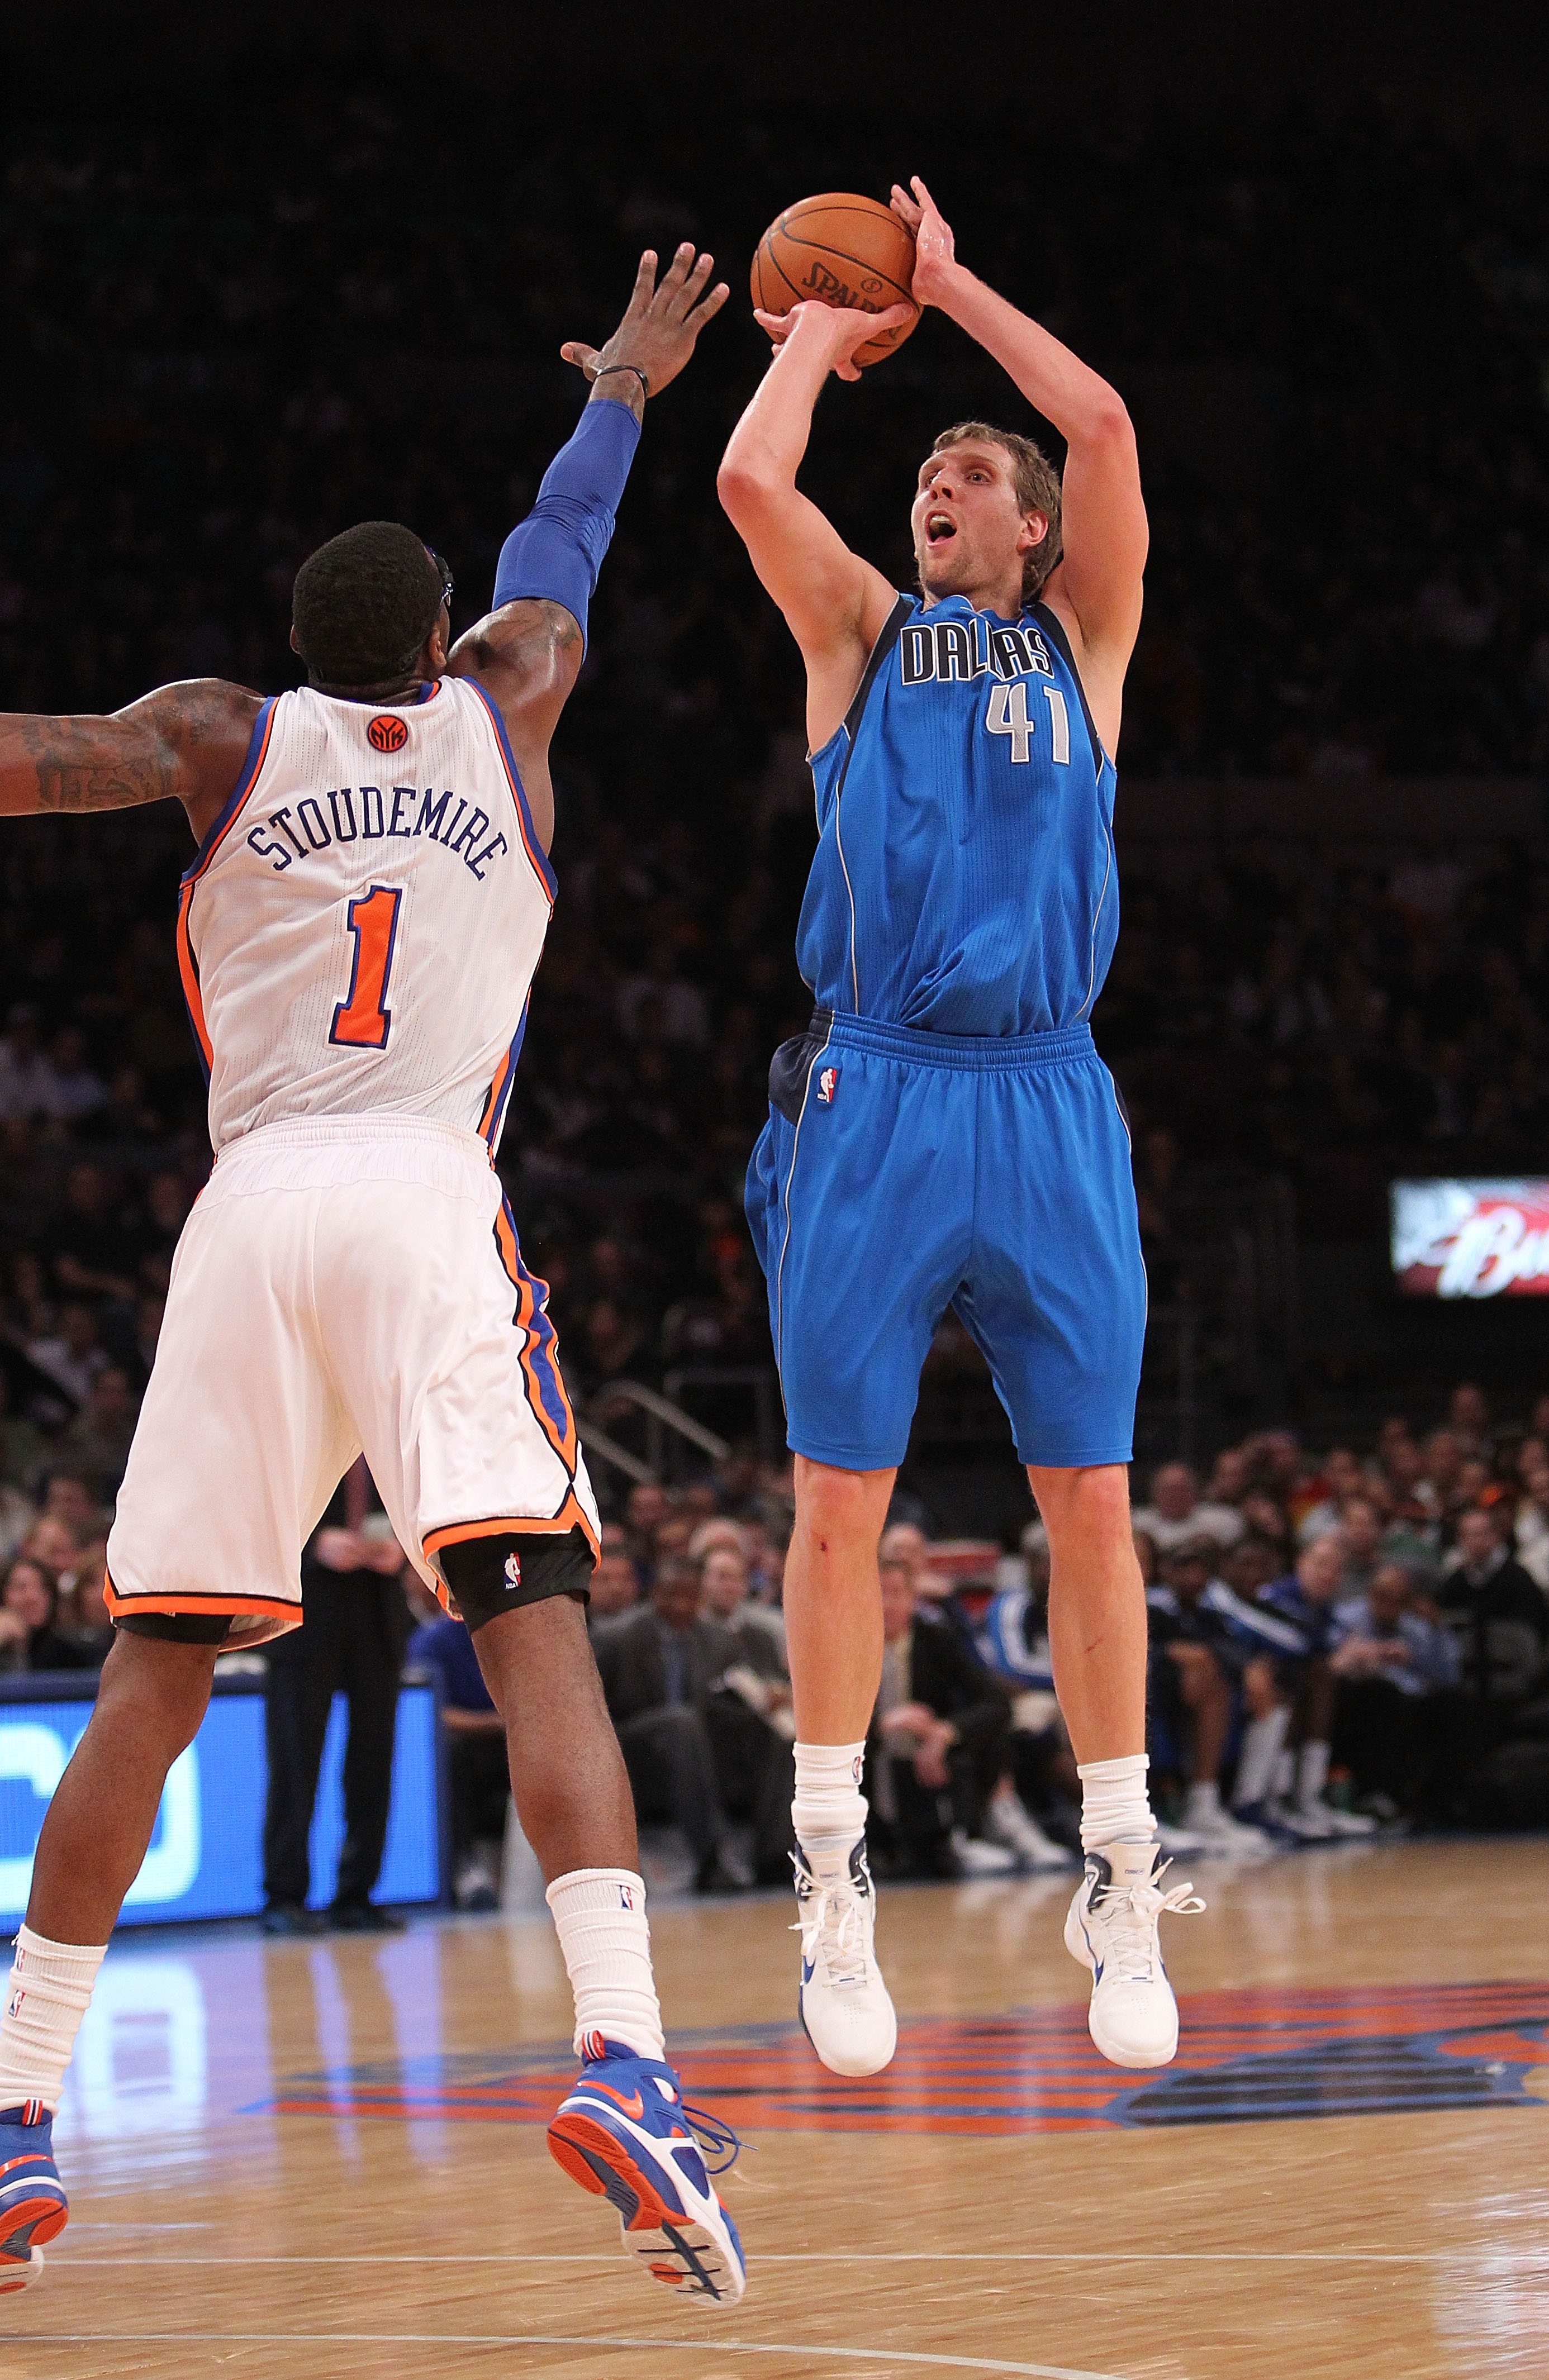 NEW YORK, NY - FEBRUARY 02: Dirk Nowitzki #41 of the Dallas Mavericks shoots over Amar'e Stoudemire #1 of the New York Knicks at Madison Square Garden on February 2, 2011 in New York City. NOTE TO USER: User expressly acknowledges and agrees that, by down